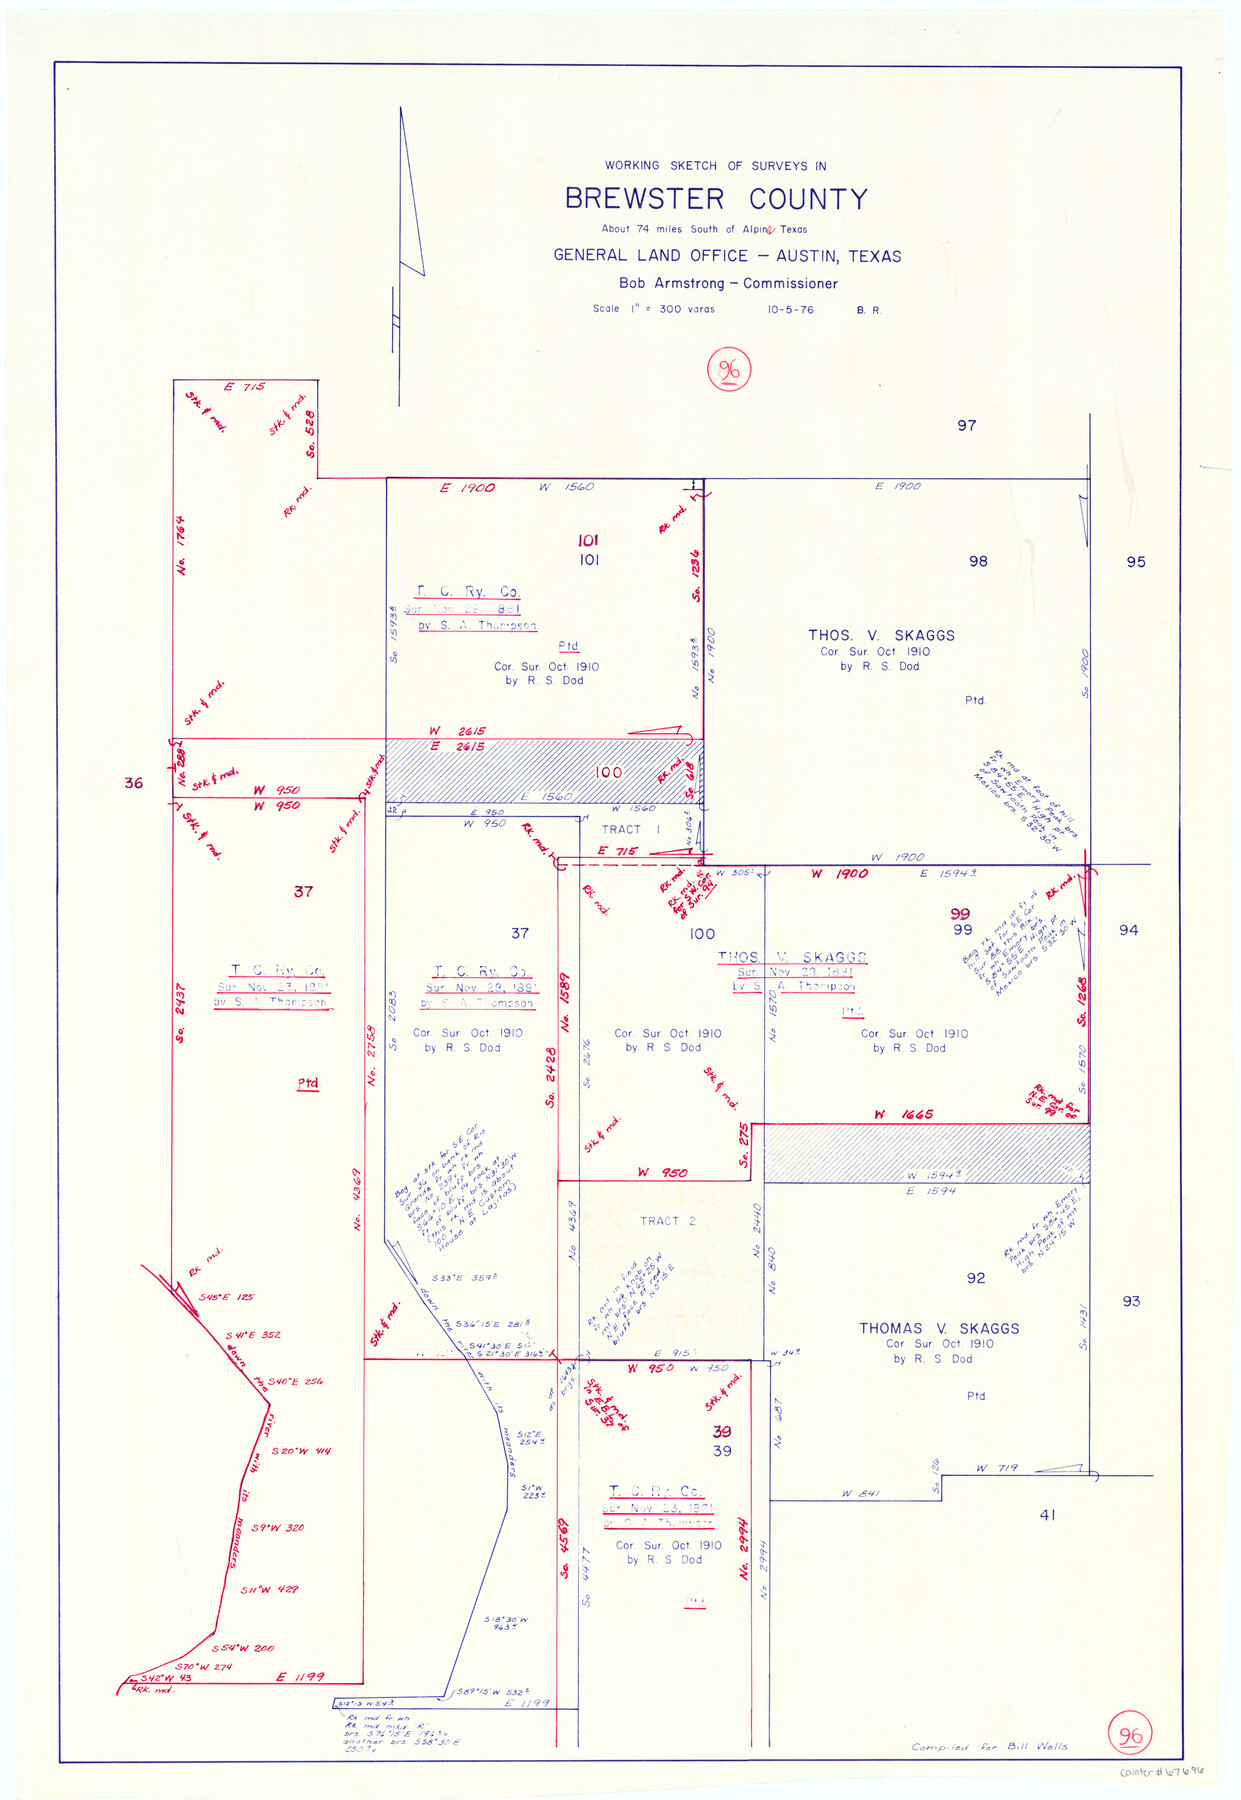 67696, Brewster County Working Sketch 96, General Map Collection